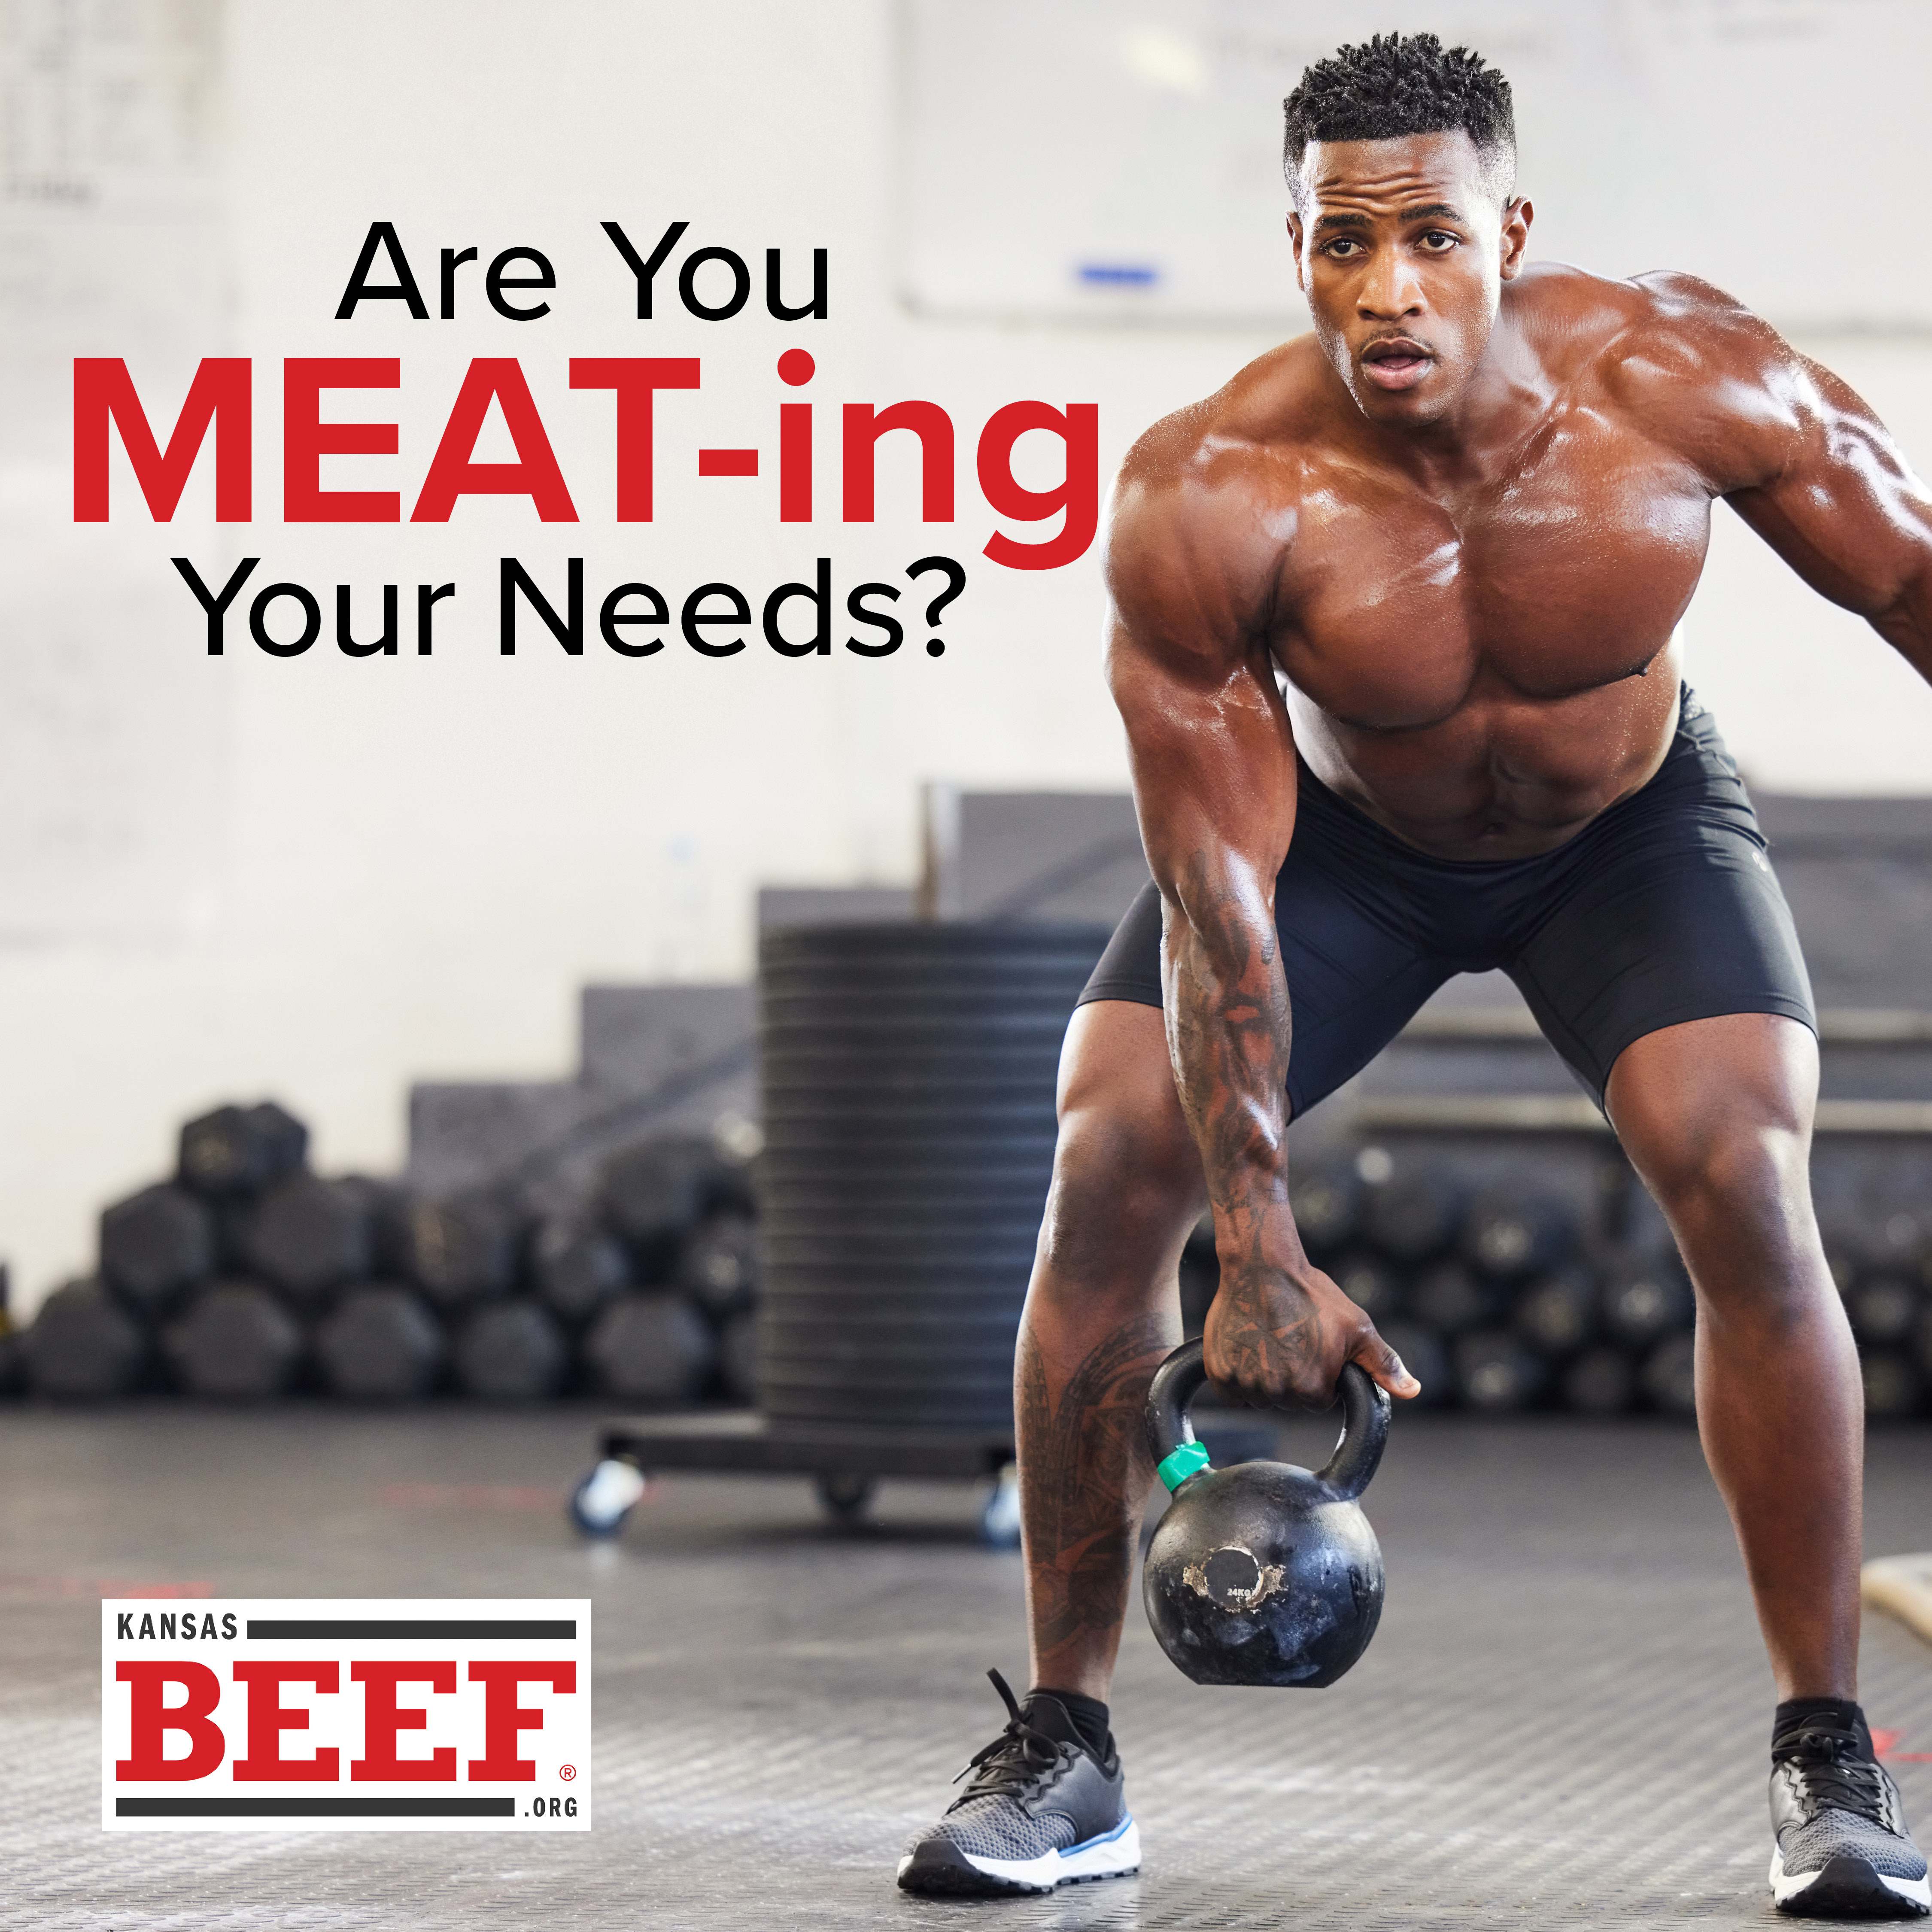 Meat-ing Your Needs Instagram post graphic